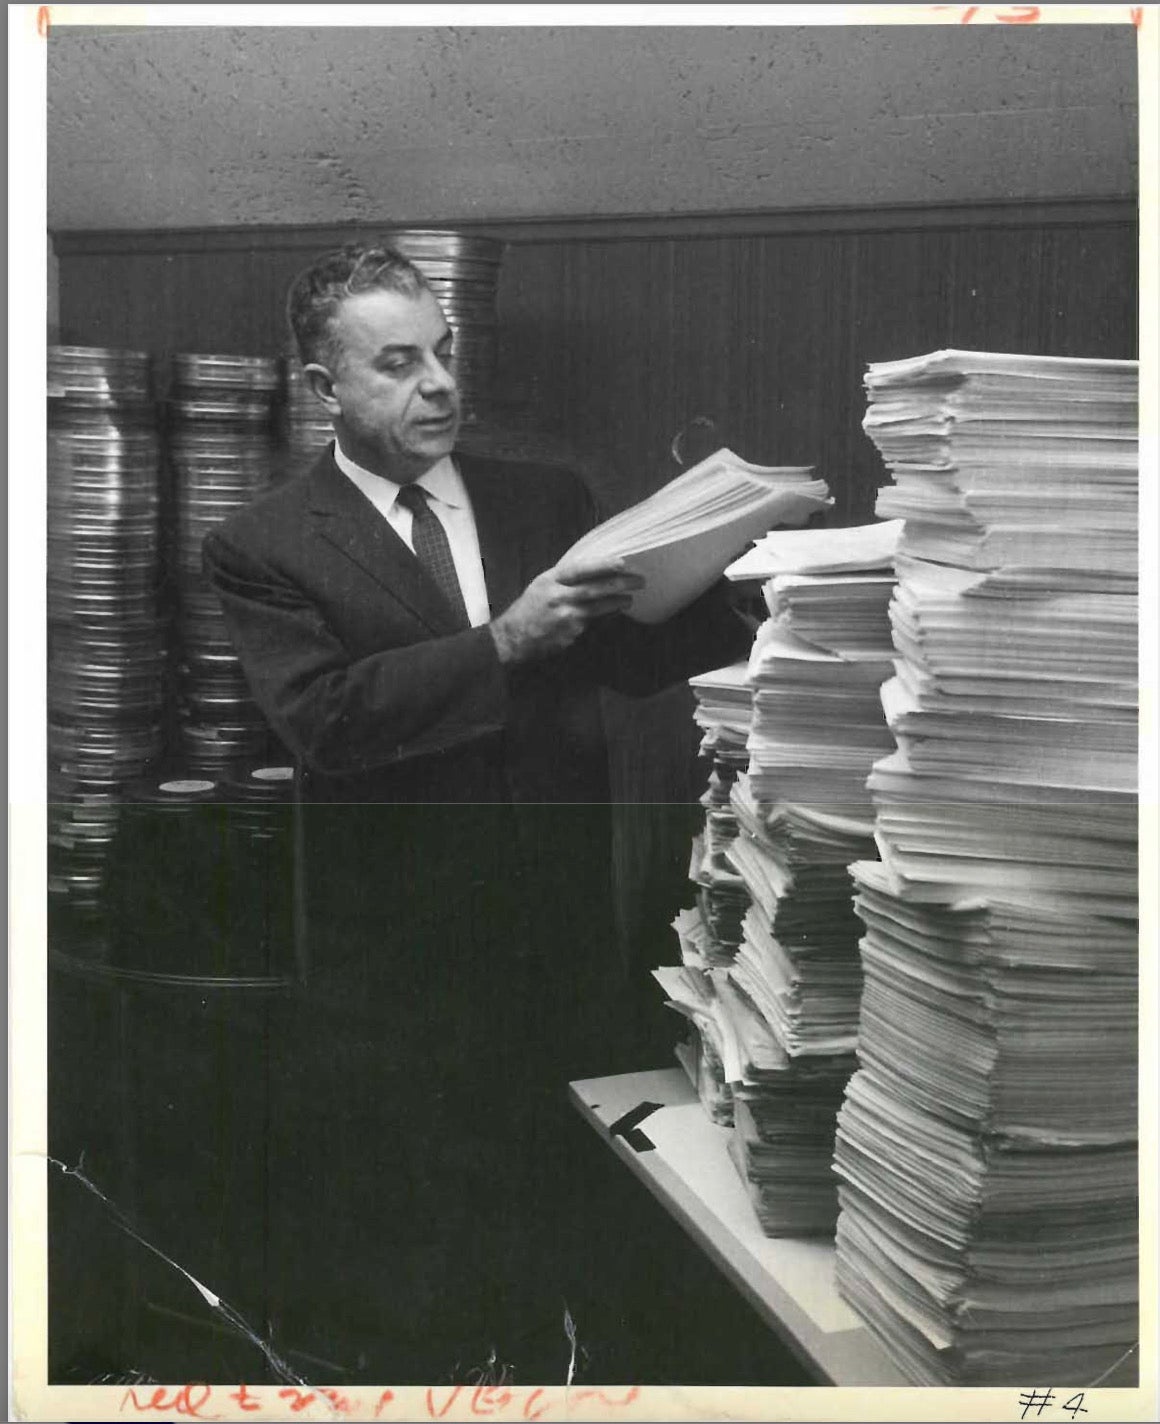 Frank Sidel standing amidst a pile of "The Ohio Story" film reels and scripts